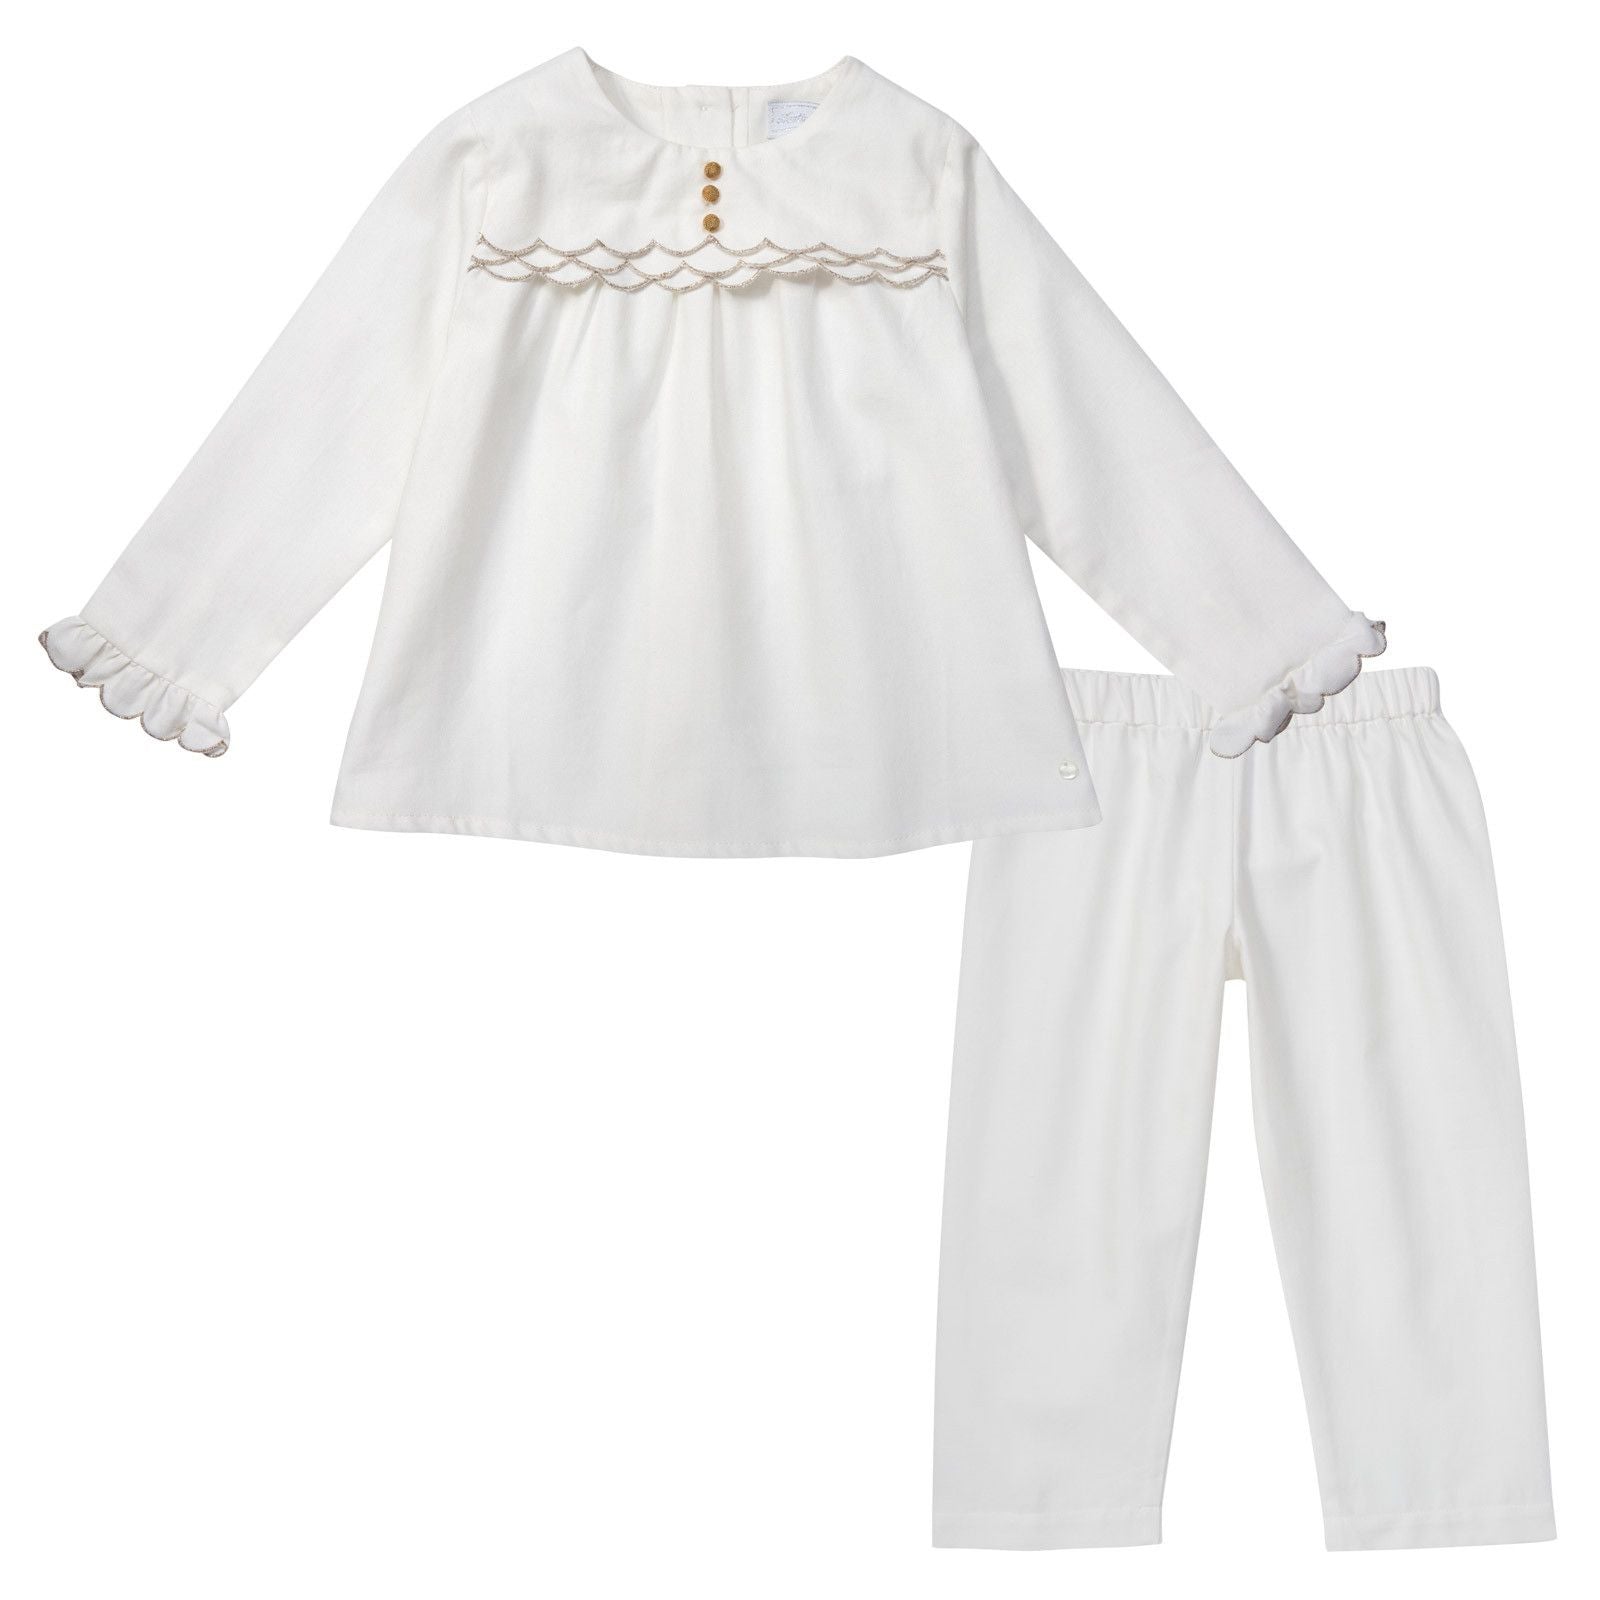 Baby White Cotton 2 Pice Babygrow With Silver Trims - CÉMAROSE | Children's Fashion Store - 1